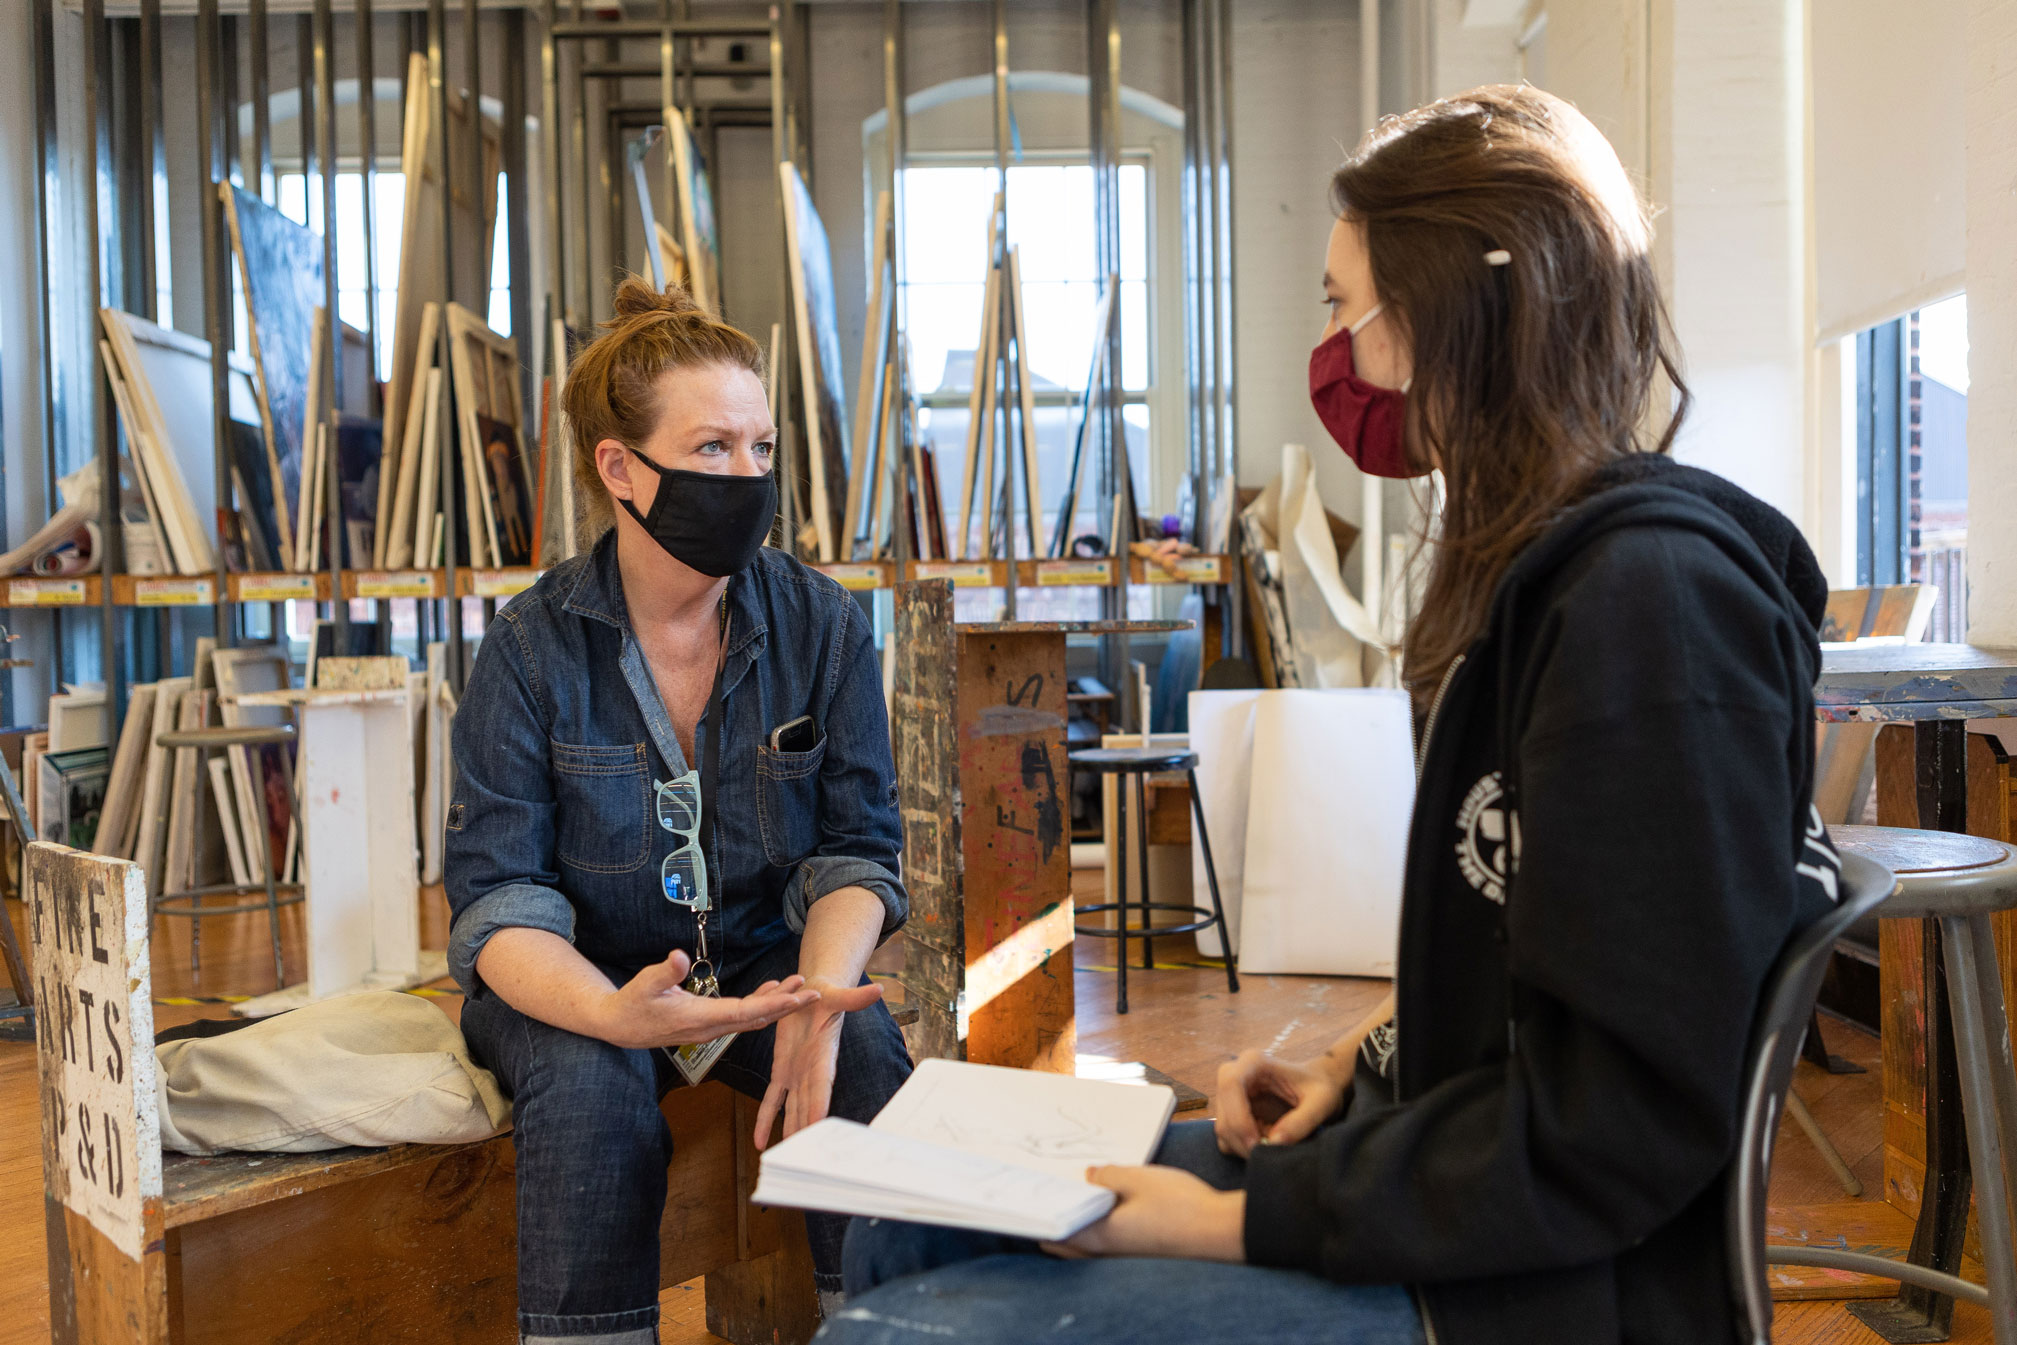 A faculty member and student are sitting in a studio space conversing. There are canvases behind them on stored on racks.